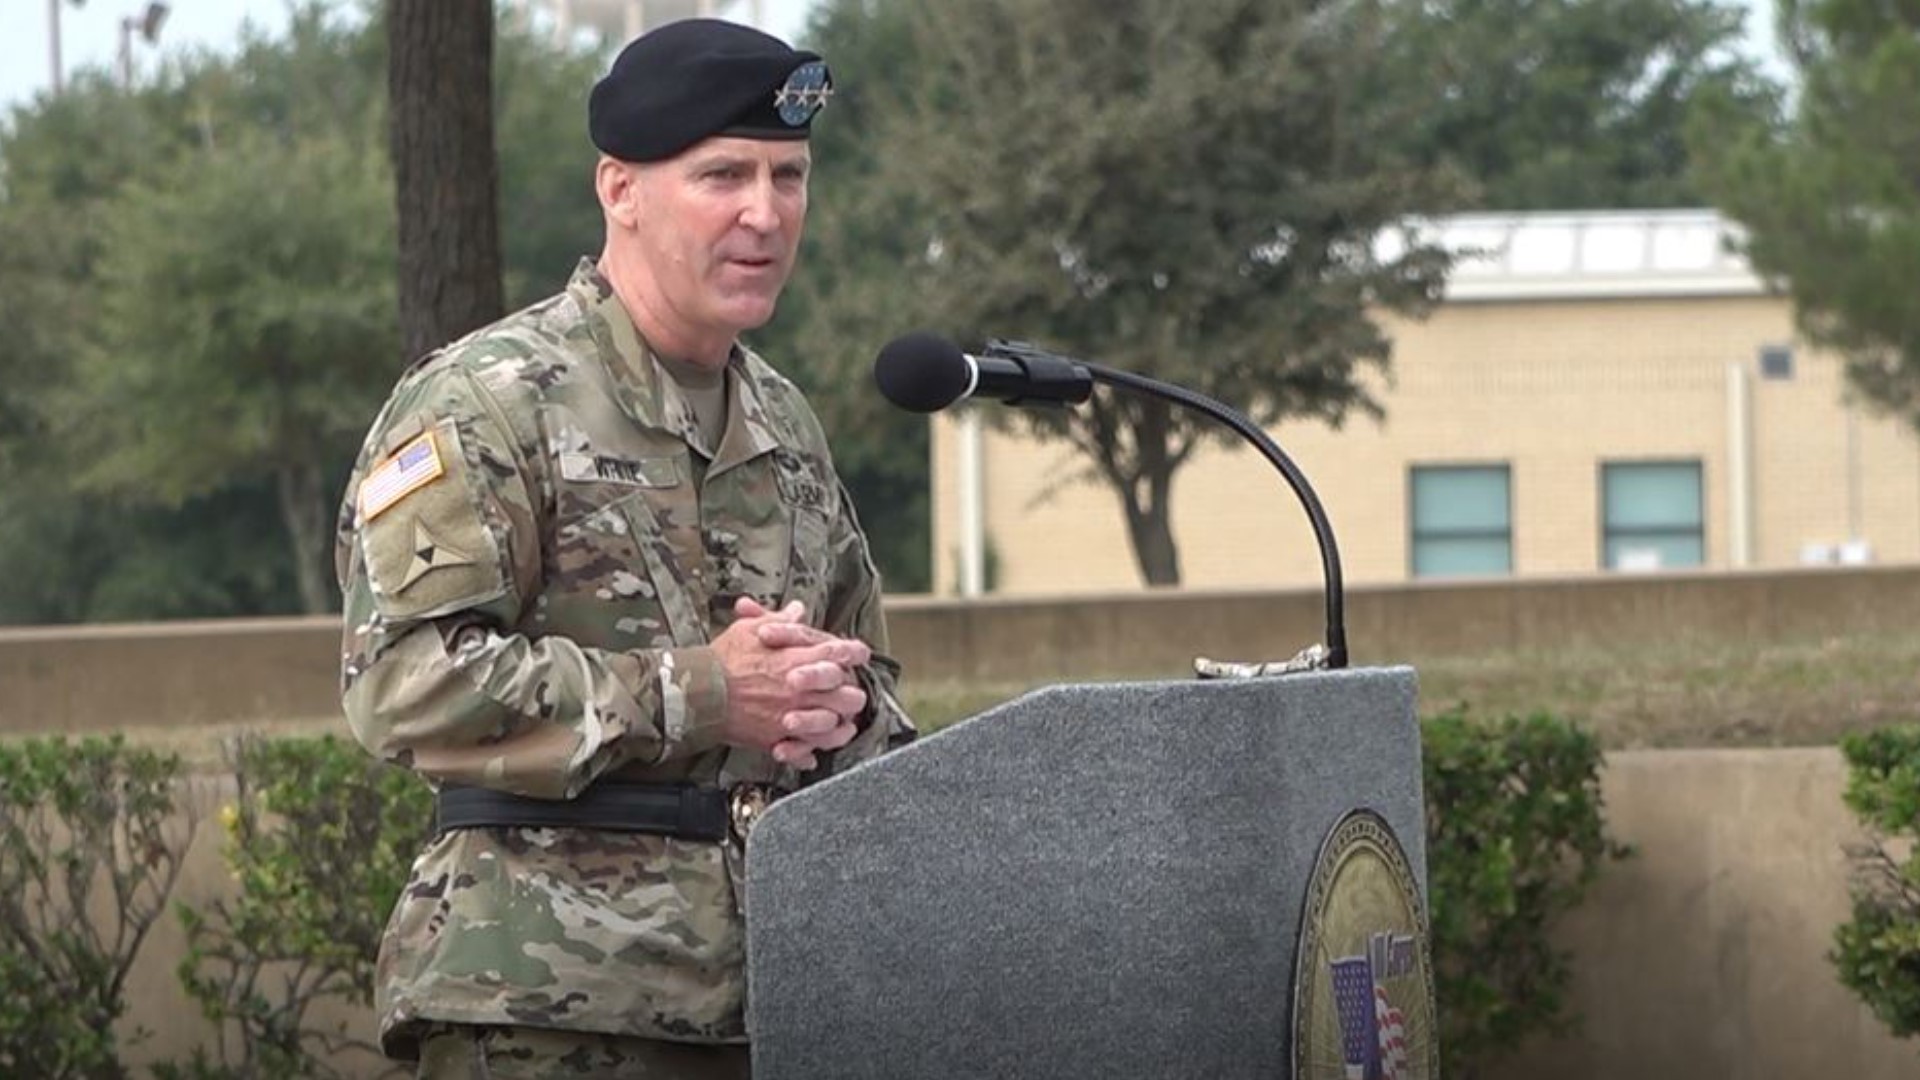 After a yearlong deployment was in support of Combined Joint Task Force – Operation Inherent Resolve, the Commanding General at Fort Hood is back on post